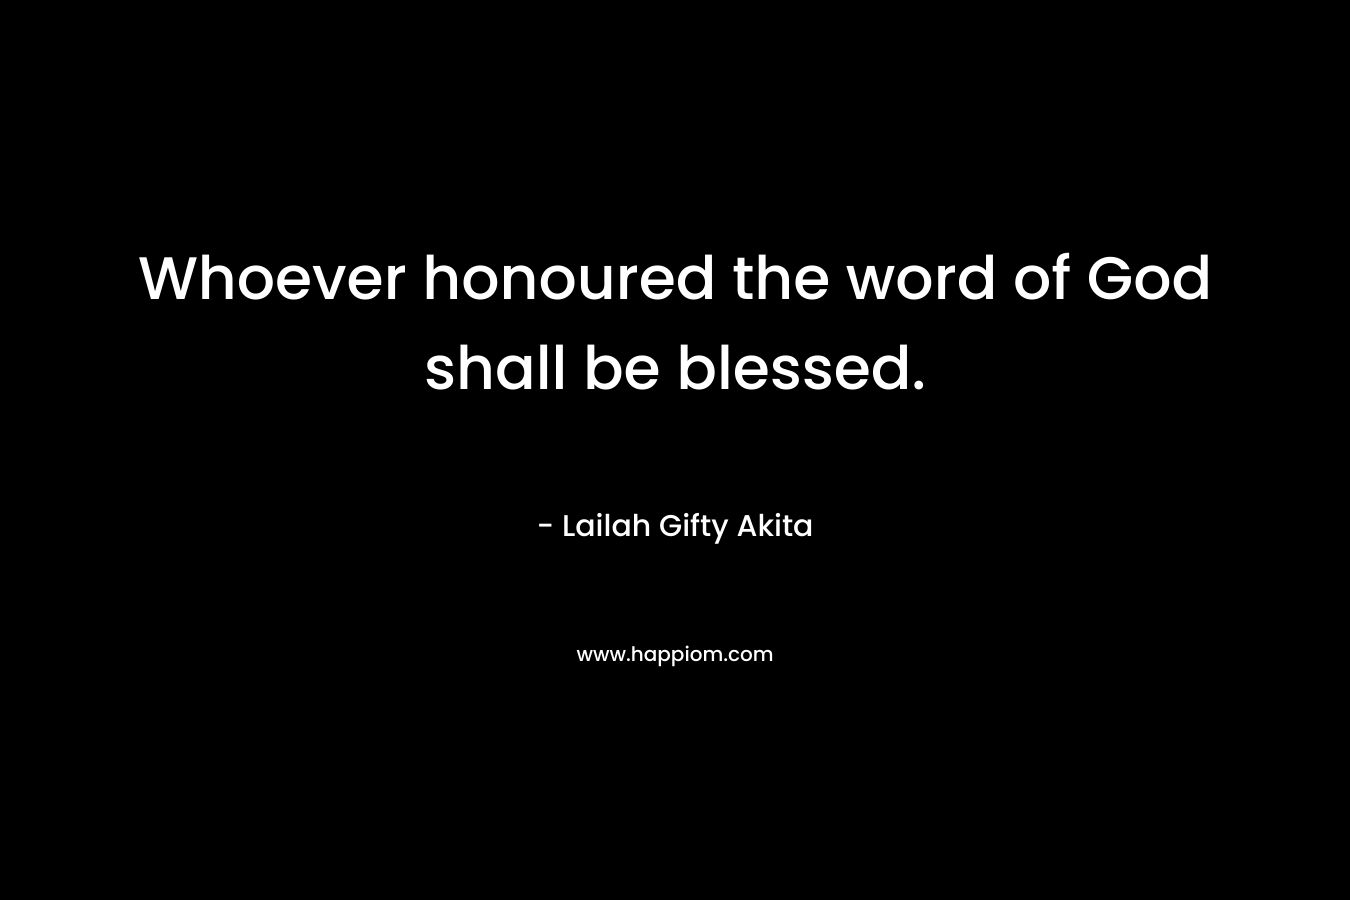 Whoever honoured the word of God shall be blessed. – Lailah Gifty Akita